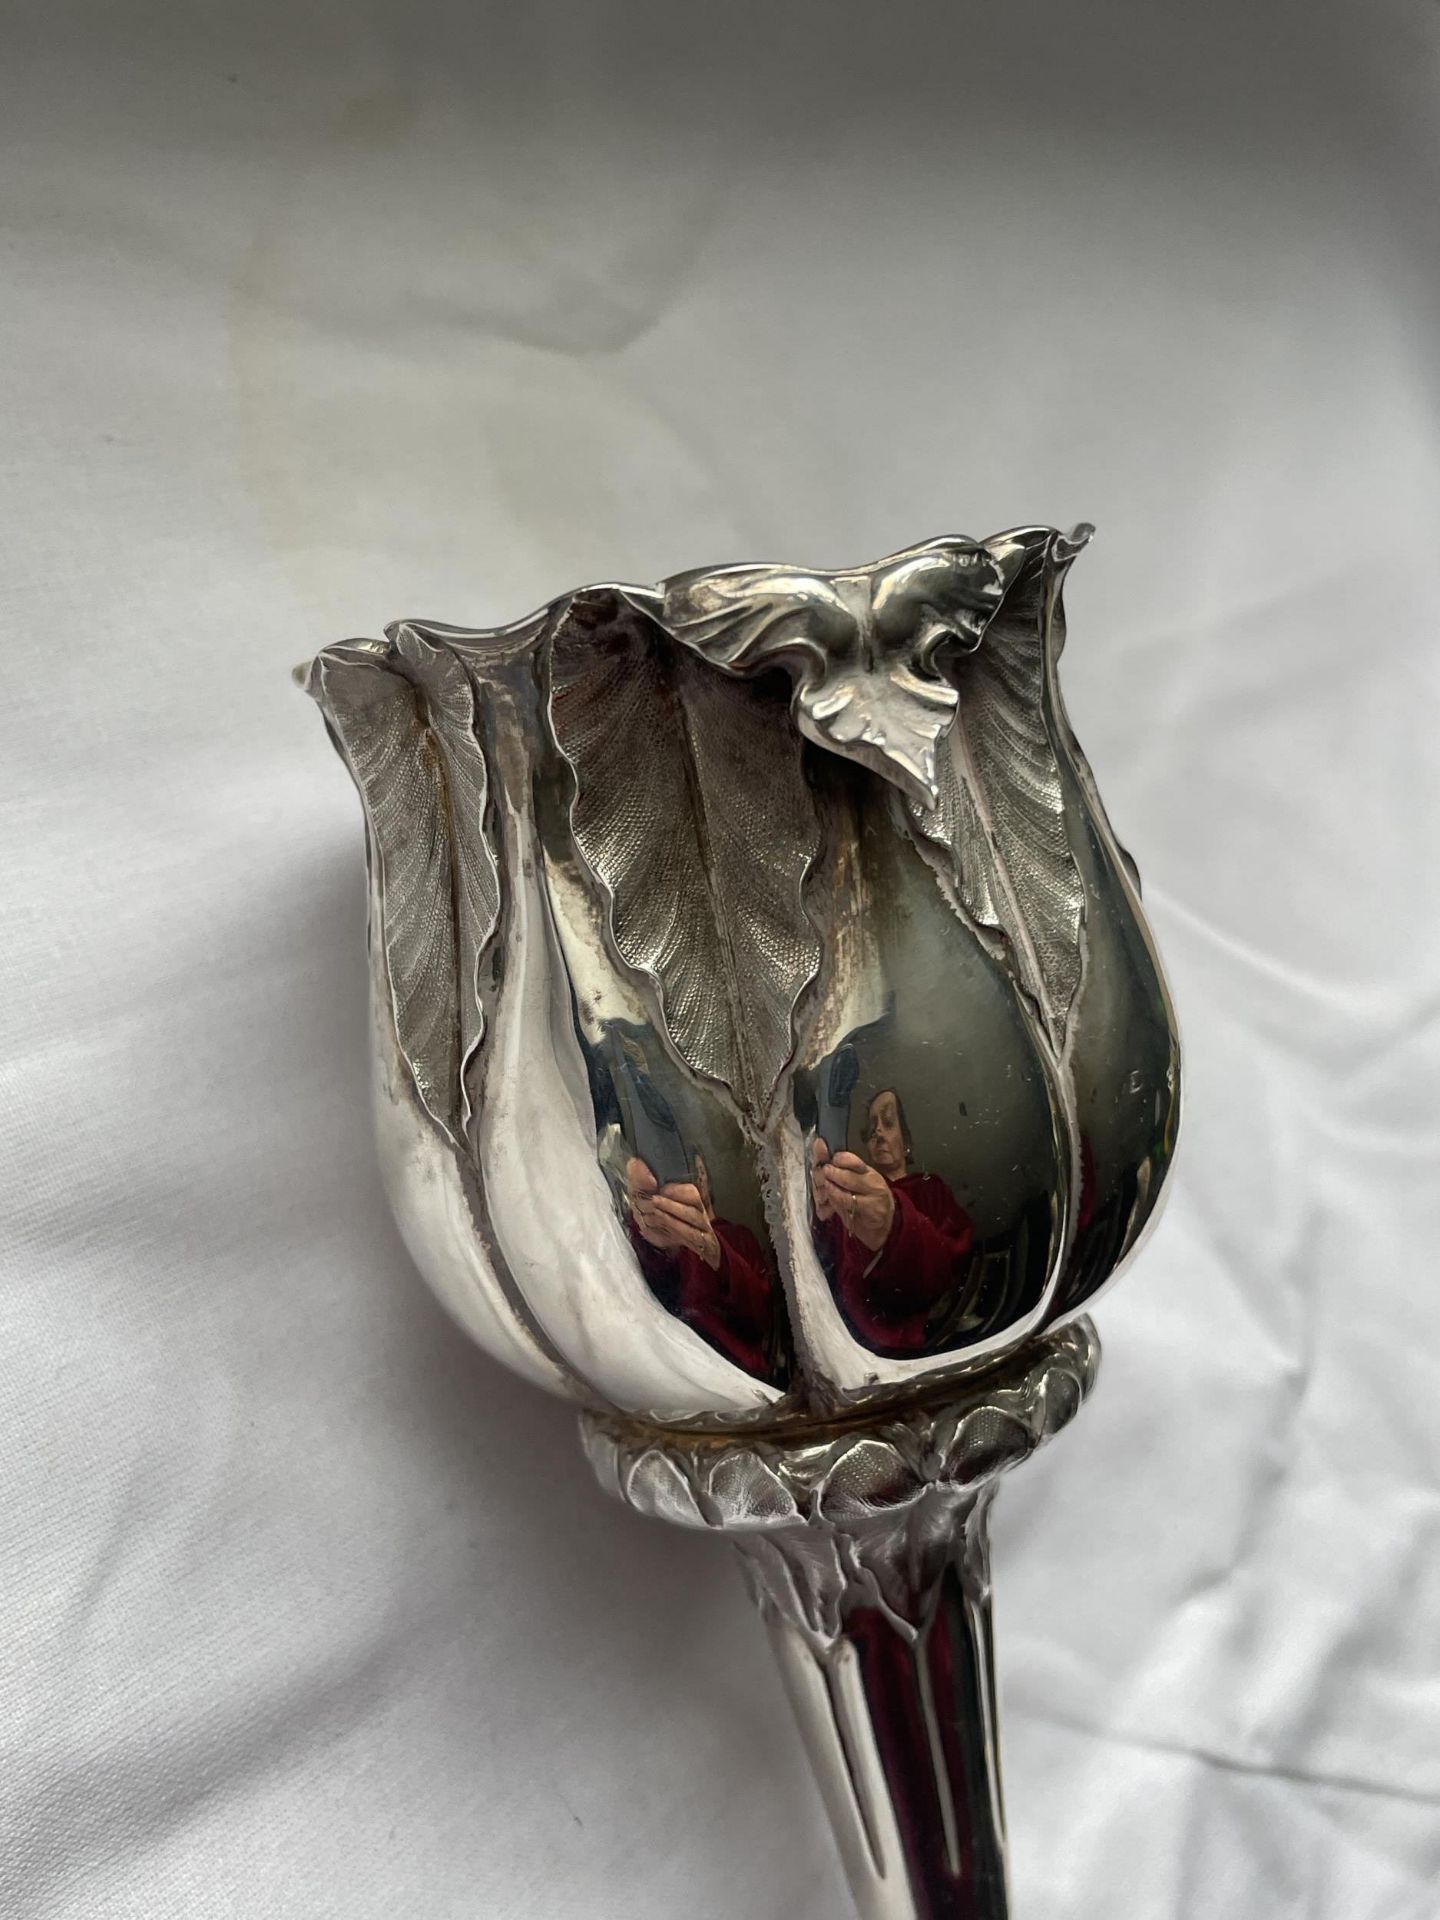 A GEORGIAN HALLMARKED SILVER TWO PIECE ROSE DESIGN FUNNEL, MARKS INDISTINCT, WEIGHT 131 GRAMS - Image 9 of 18